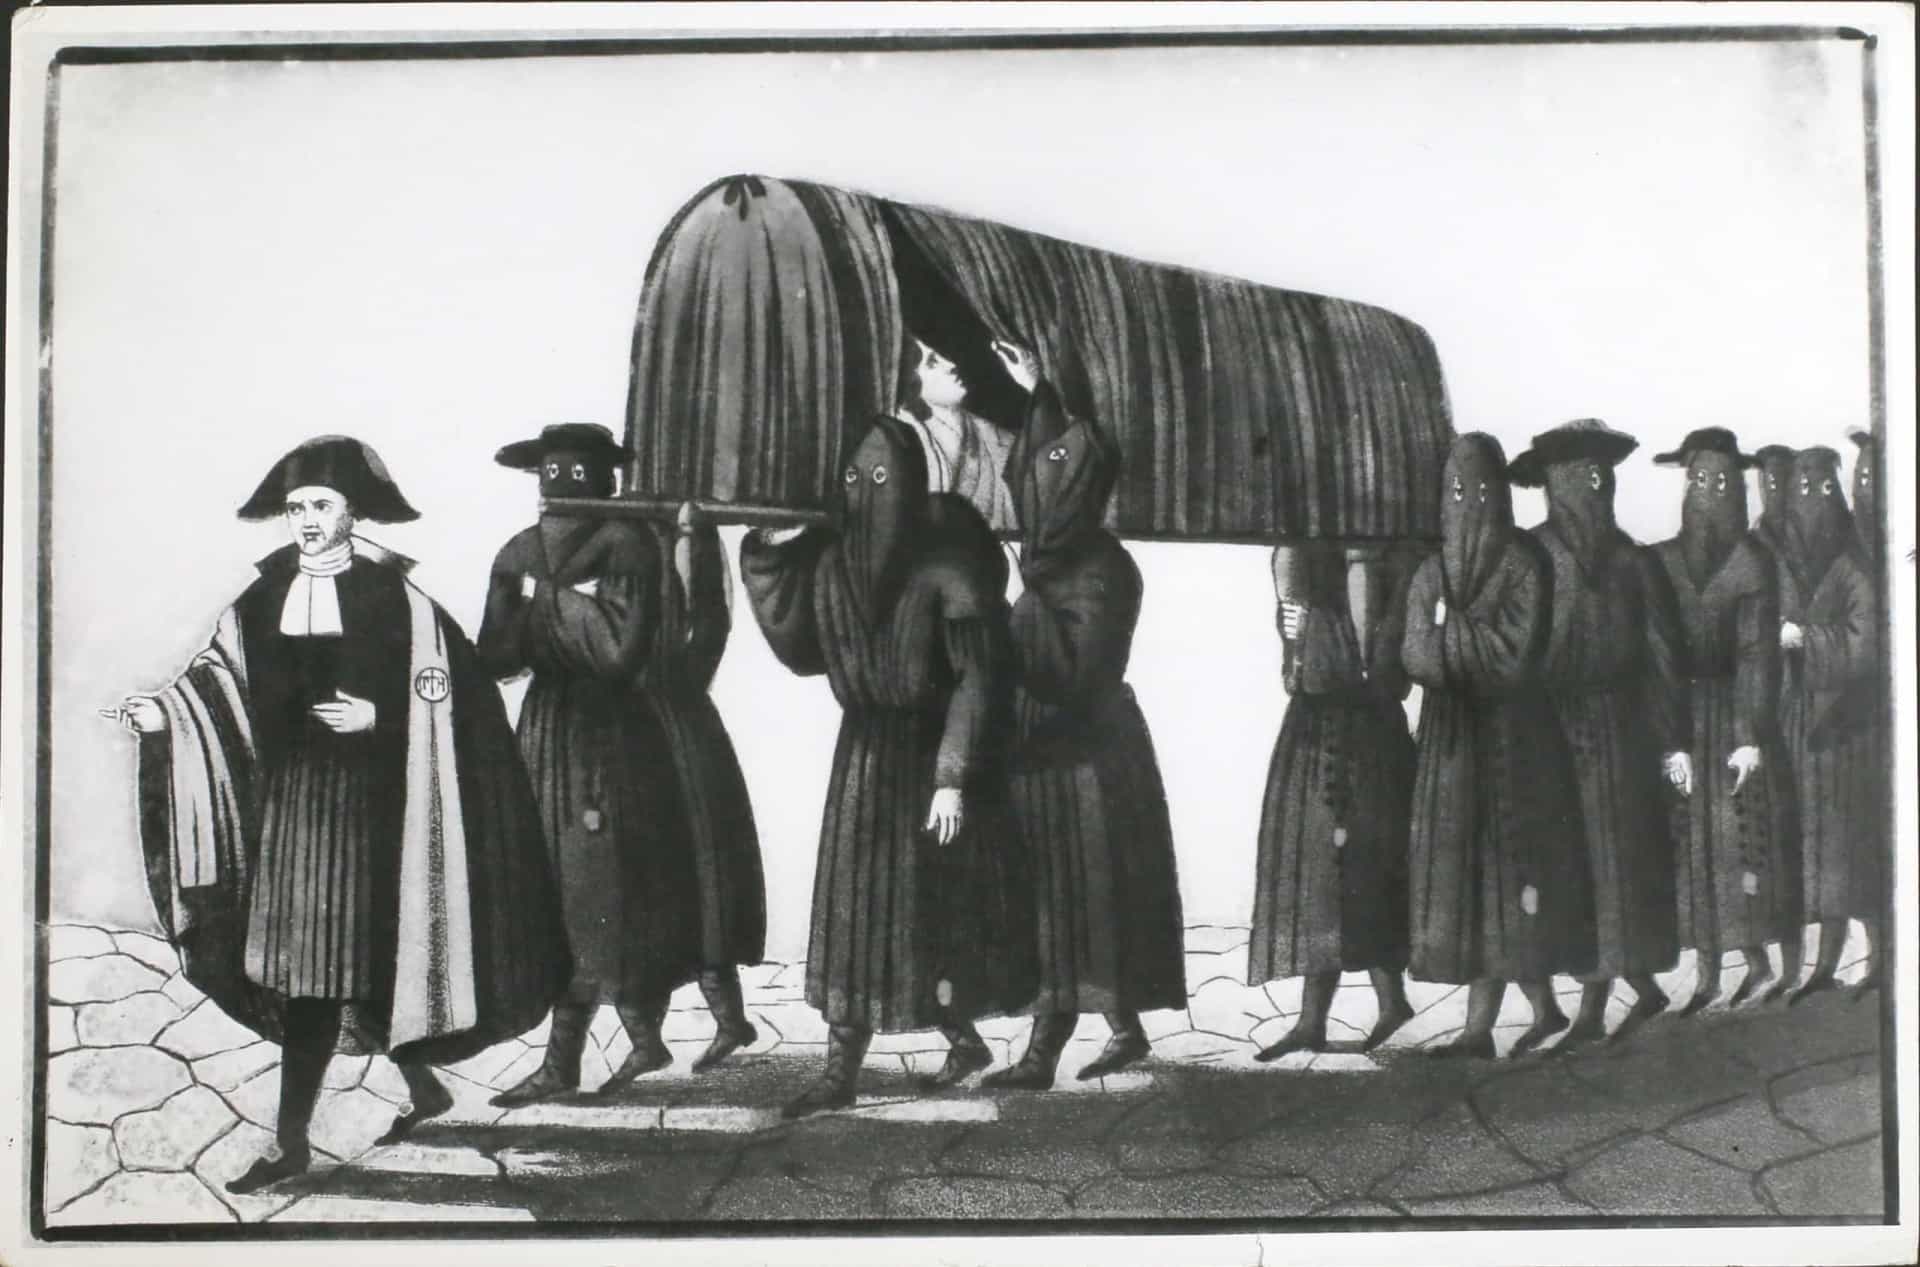 <p>In 1347, a different ship arrived in Sicily, with its crew barely surviving. The sickness quickly spread across the whole island. People fleeing from Sicily carried the disease to mainland Italy, where by the summer of the next year, one third of the population had died. The image shows a plague-infected person being transported by stretcher-bearers wearing masks to protect themselves from the disease, in Florence.</p><p>You may also like:<a href="https://www.starsinsider.com/n/215960?utm_source=msn.com&utm_medium=display&utm_campaign=referral_description&utm_content=614622en-en"> Daughters or girlfriends? Celebrities who dated younger women</a></p>